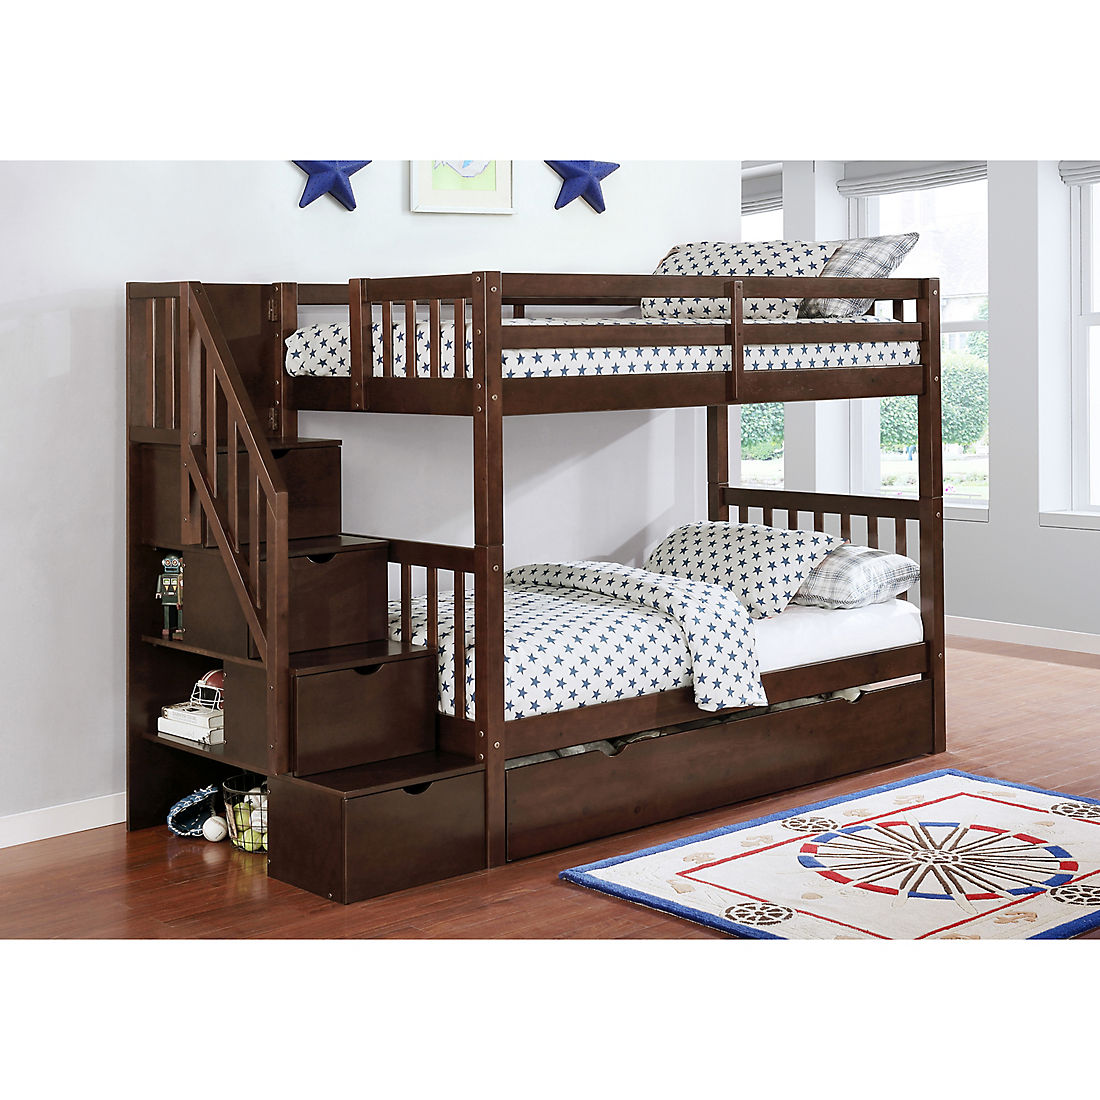 Berkley Jensen Twin Over Stairway, Full On Full Bunk Beds With Stairs